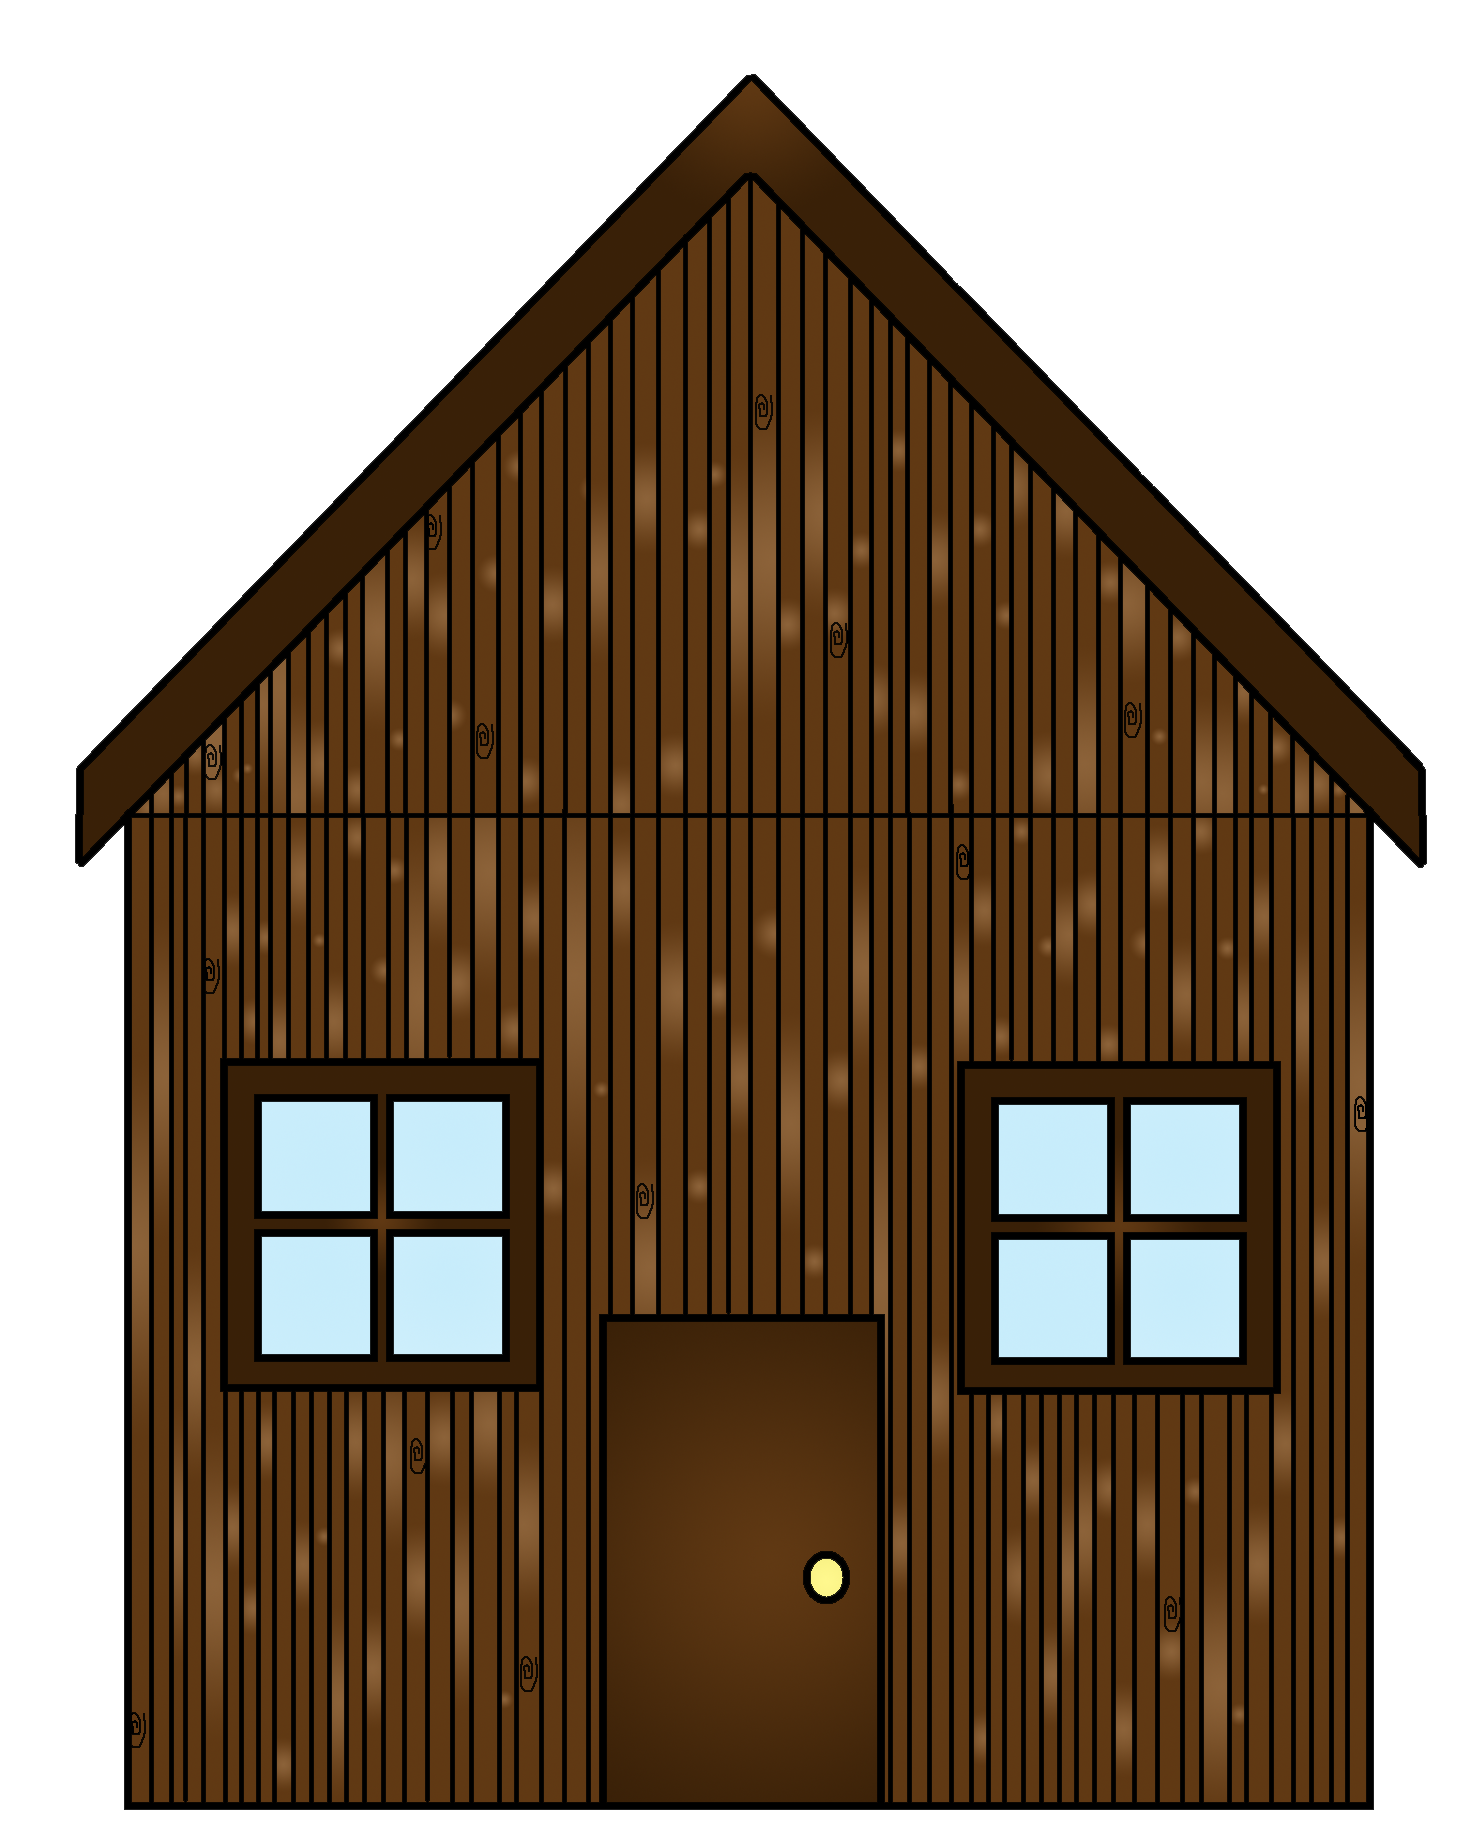 pigs clipart home